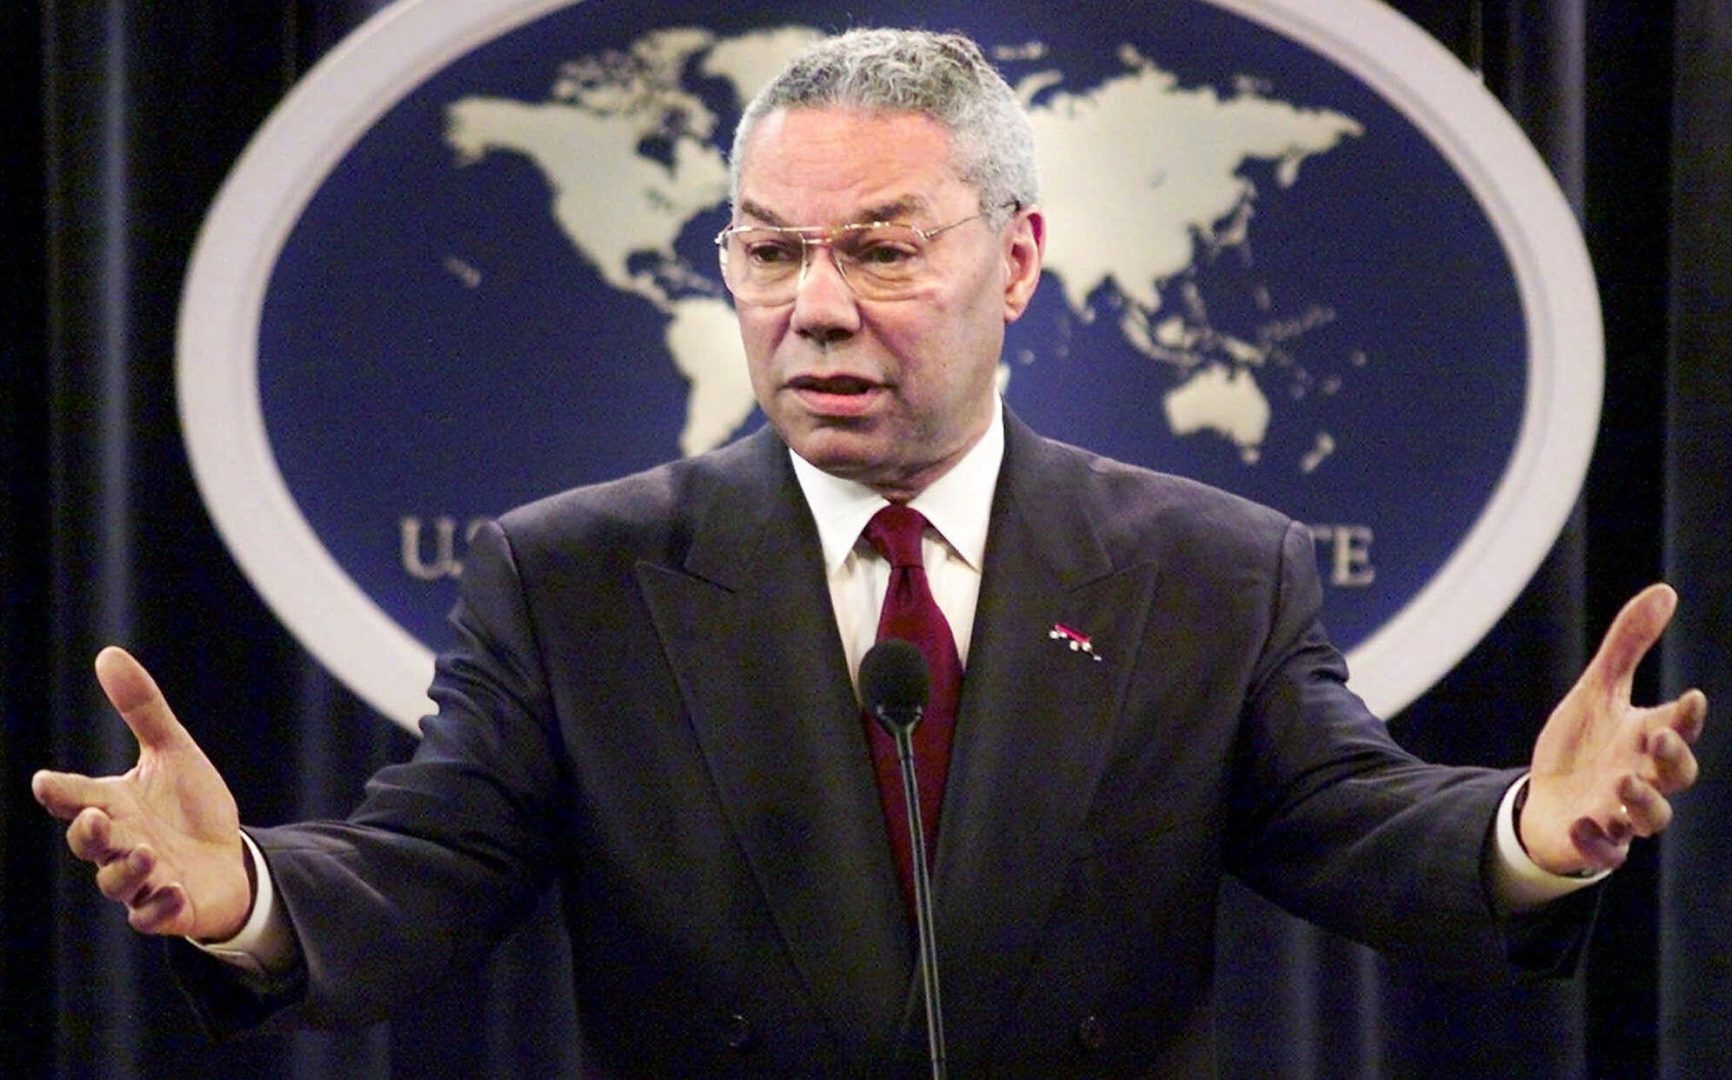 In this May 21, 2001, file photo, Secretary of State Colin Powell talks with reporters during a news conference at the Department of State in Washington. Powell, who also served as chairman of the Joint Chiefs, has died from COVID-19 complications, his family said Monday, Oct. 18, 2021.